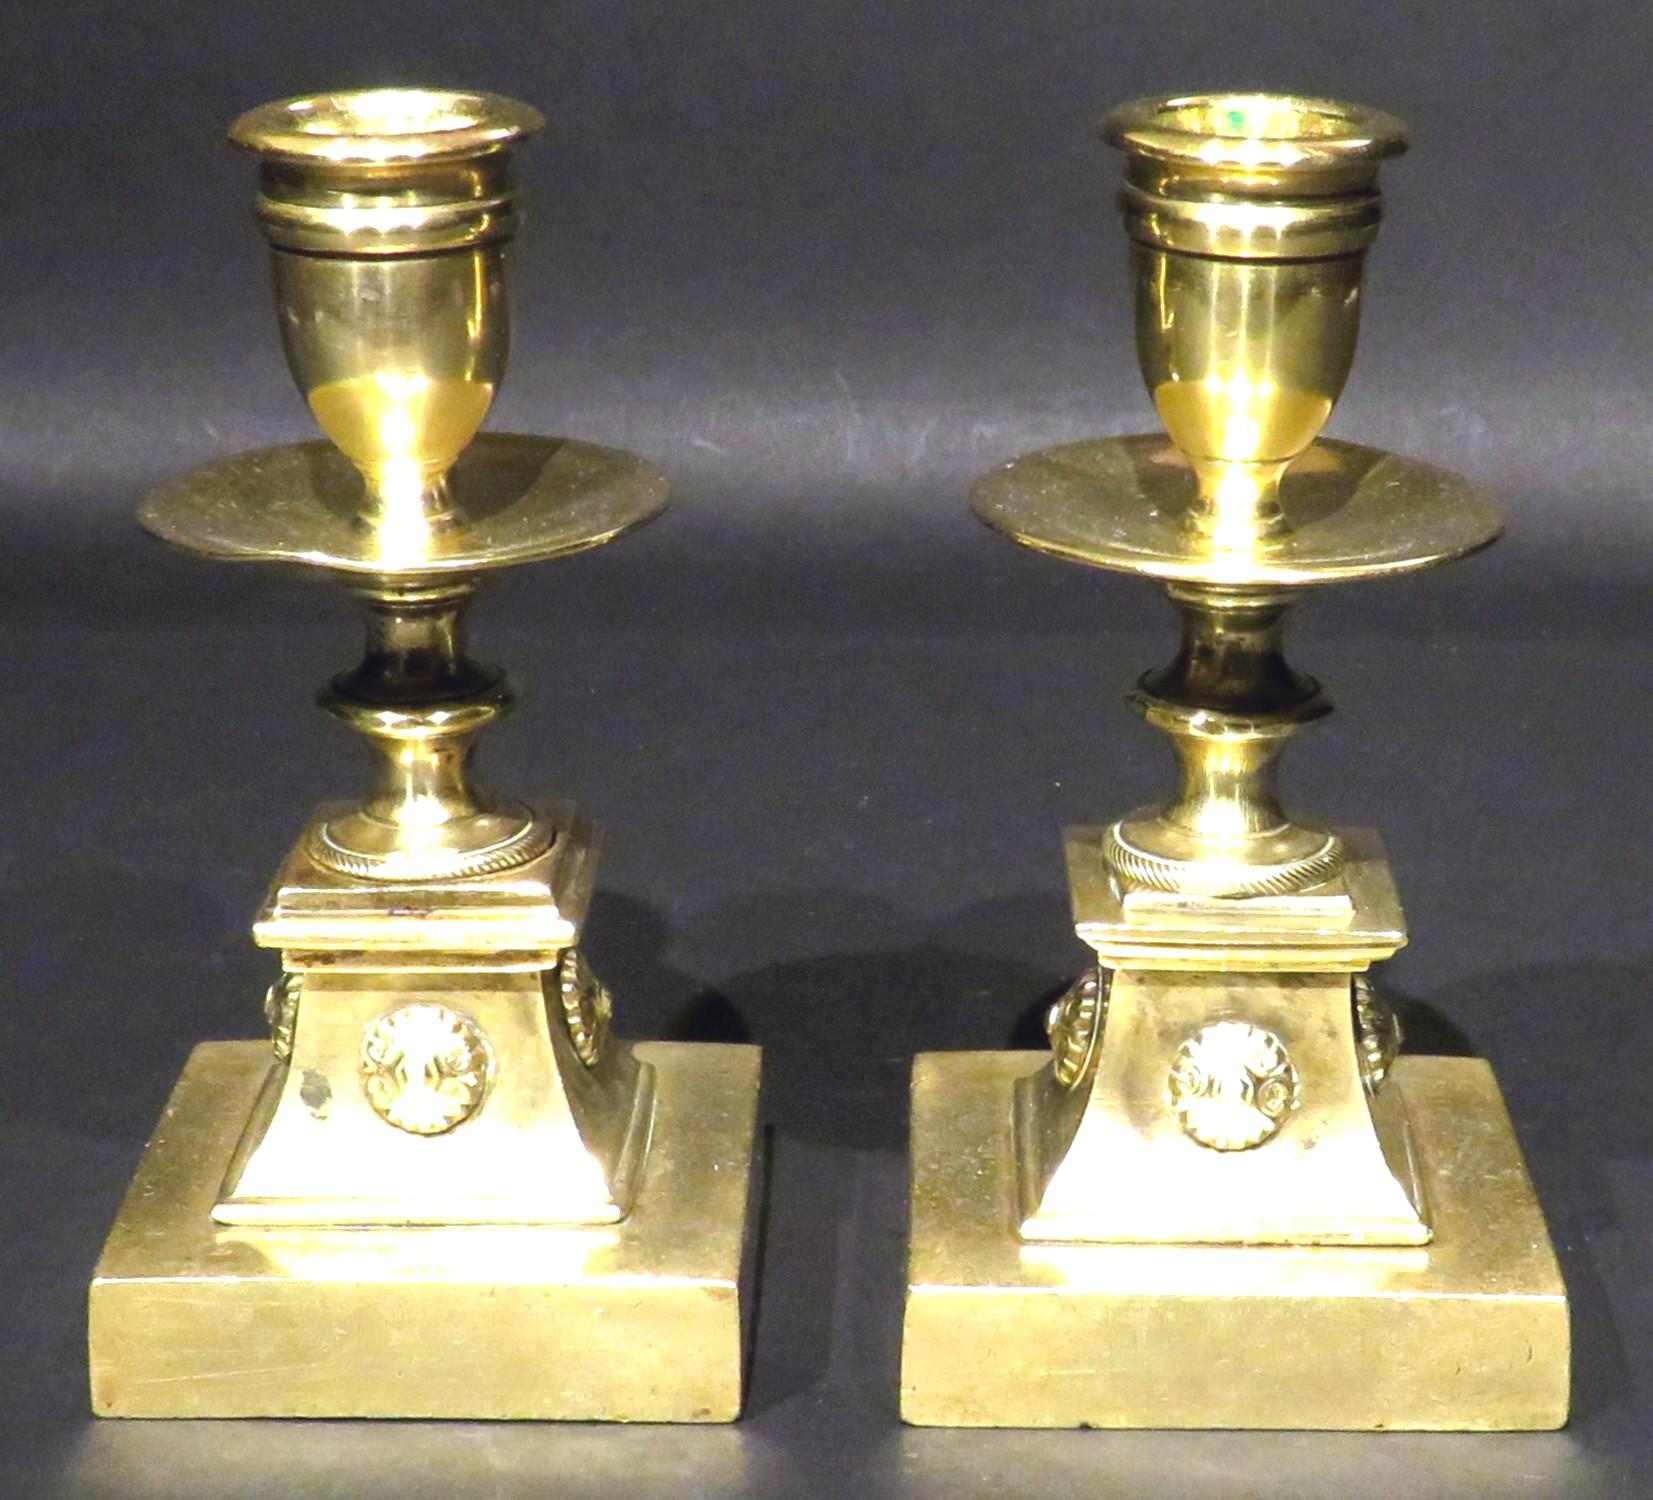 A very fine & diminutive pair of 19th century neoclassical gilt bronze dwarf candlesticks, showing urn shaped nozzles & flattened drip pans mounted atop turned columns rising from cavetto-shaped plinths on squared bases. 
All sections are